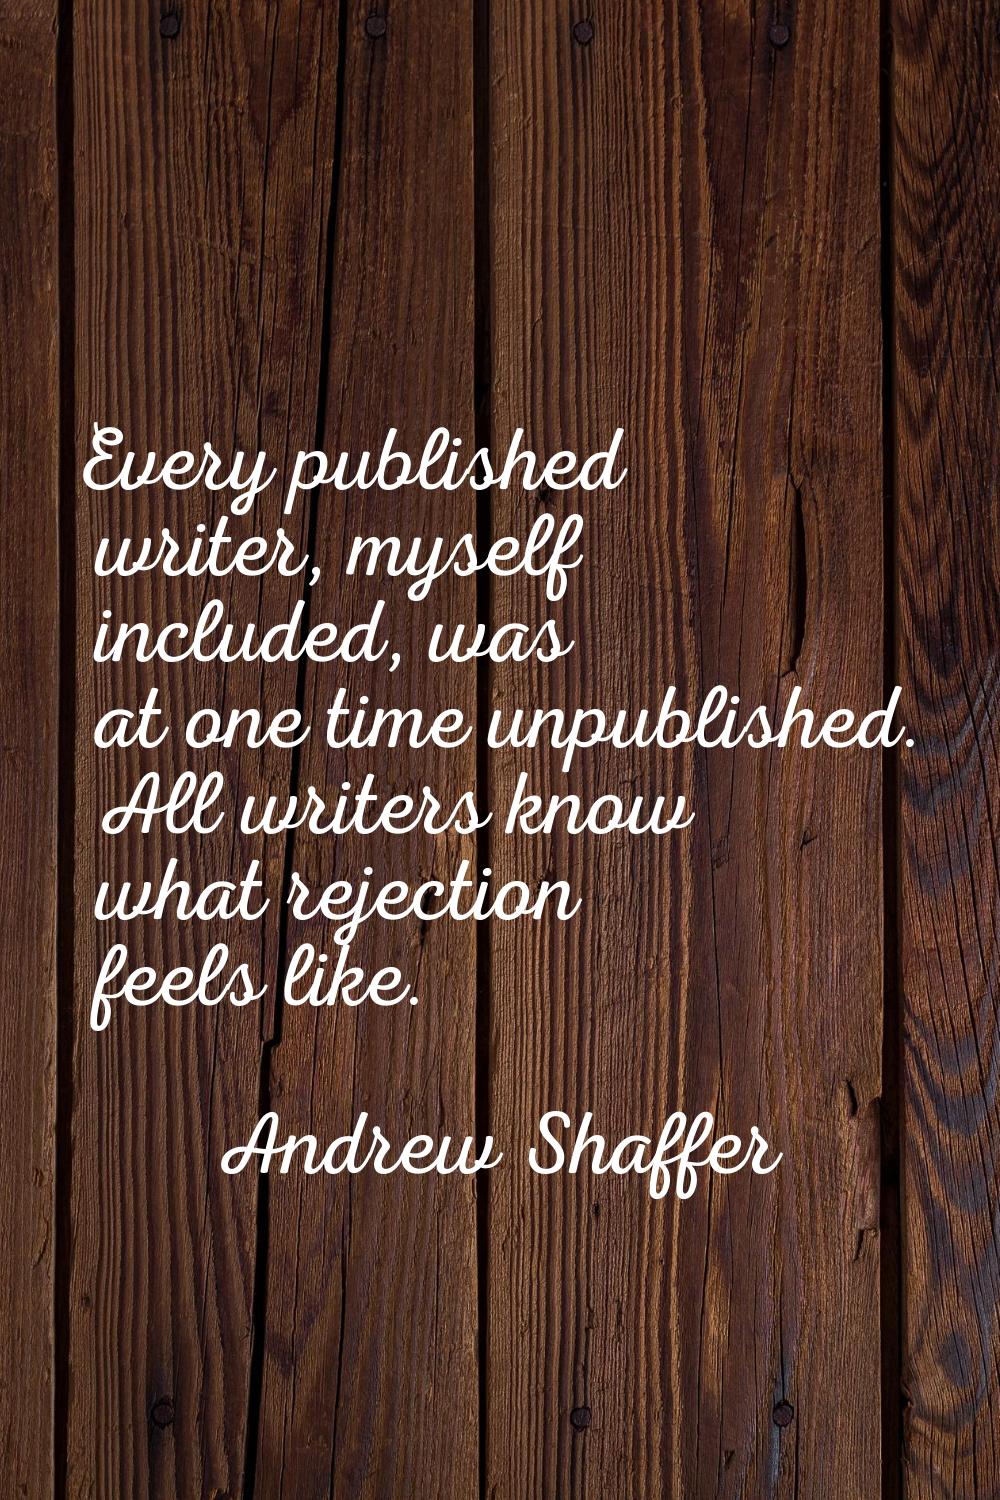 Every published writer, myself included, was at one time unpublished. All writers know what rejecti